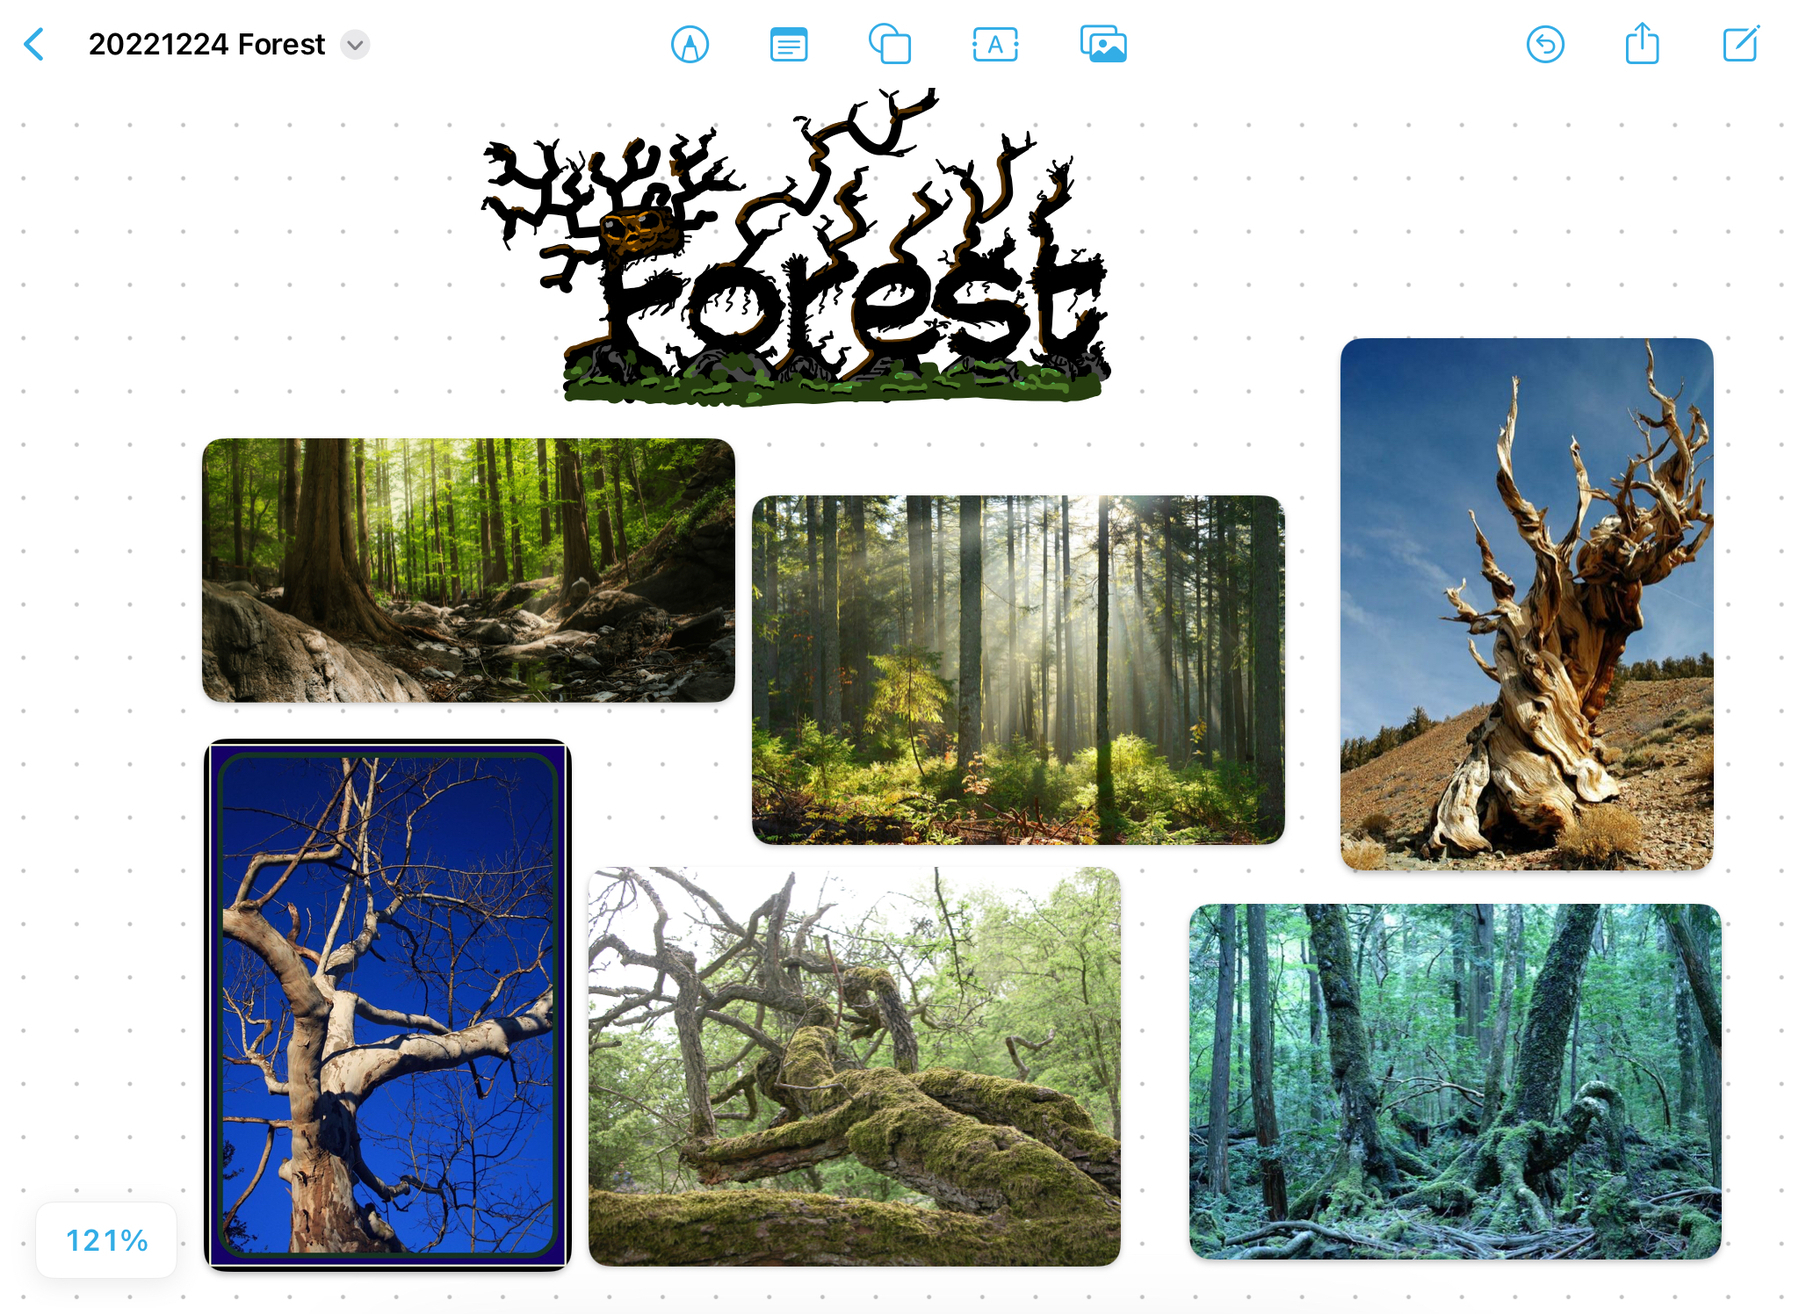 Freeform board with references for the word Forest